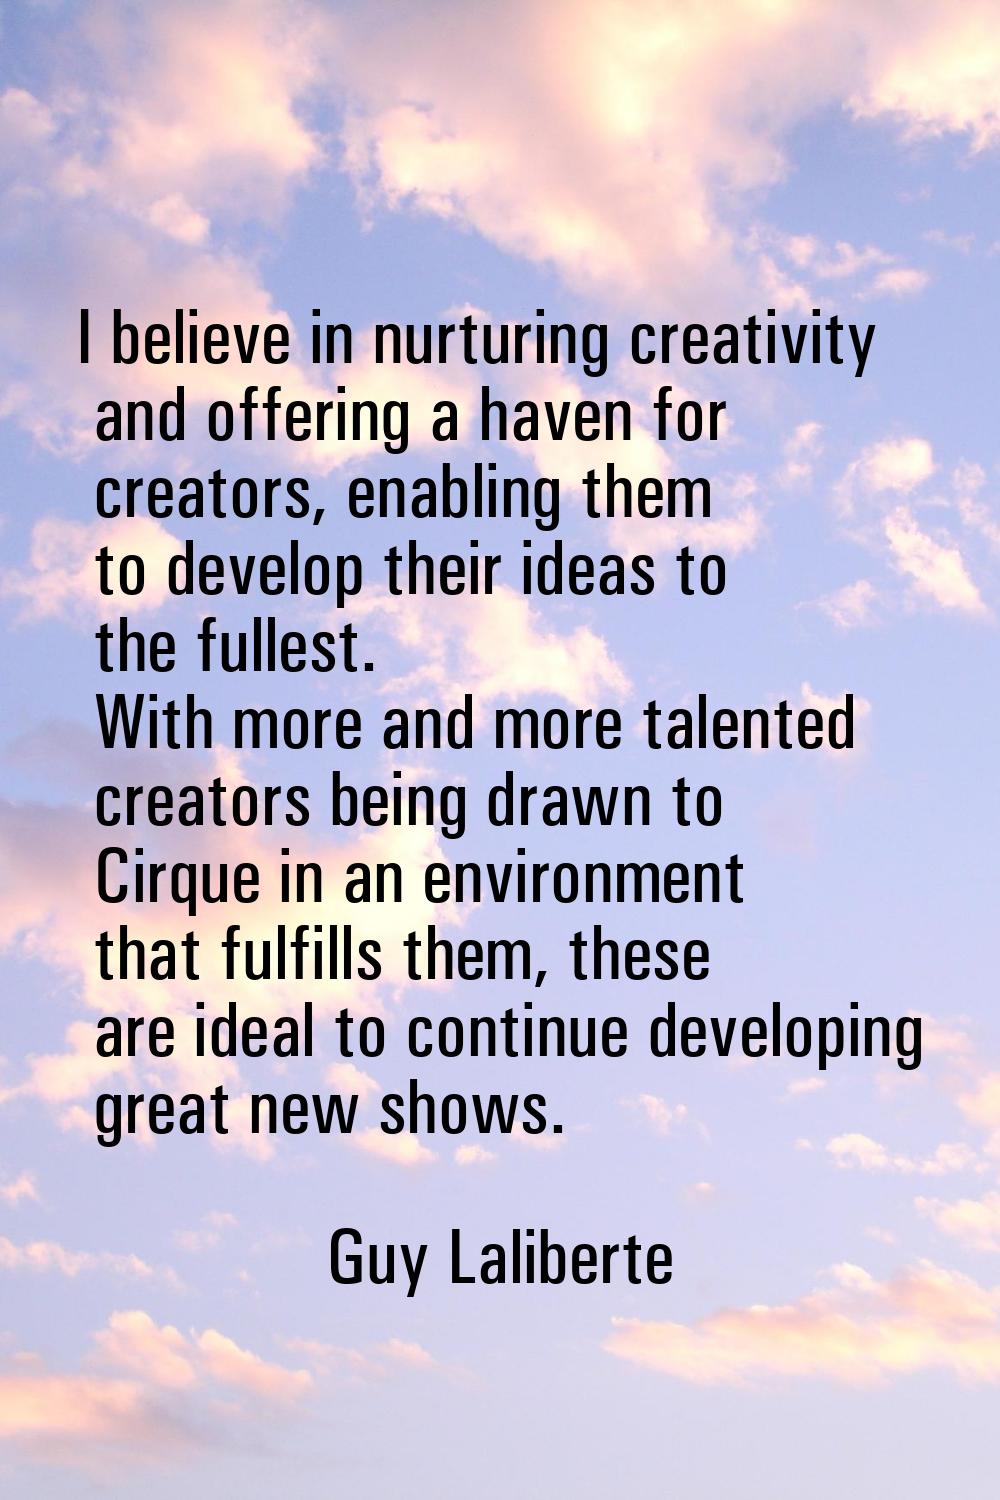 I believe in nurturing creativity and offering a haven for creators, enabling them to develop their